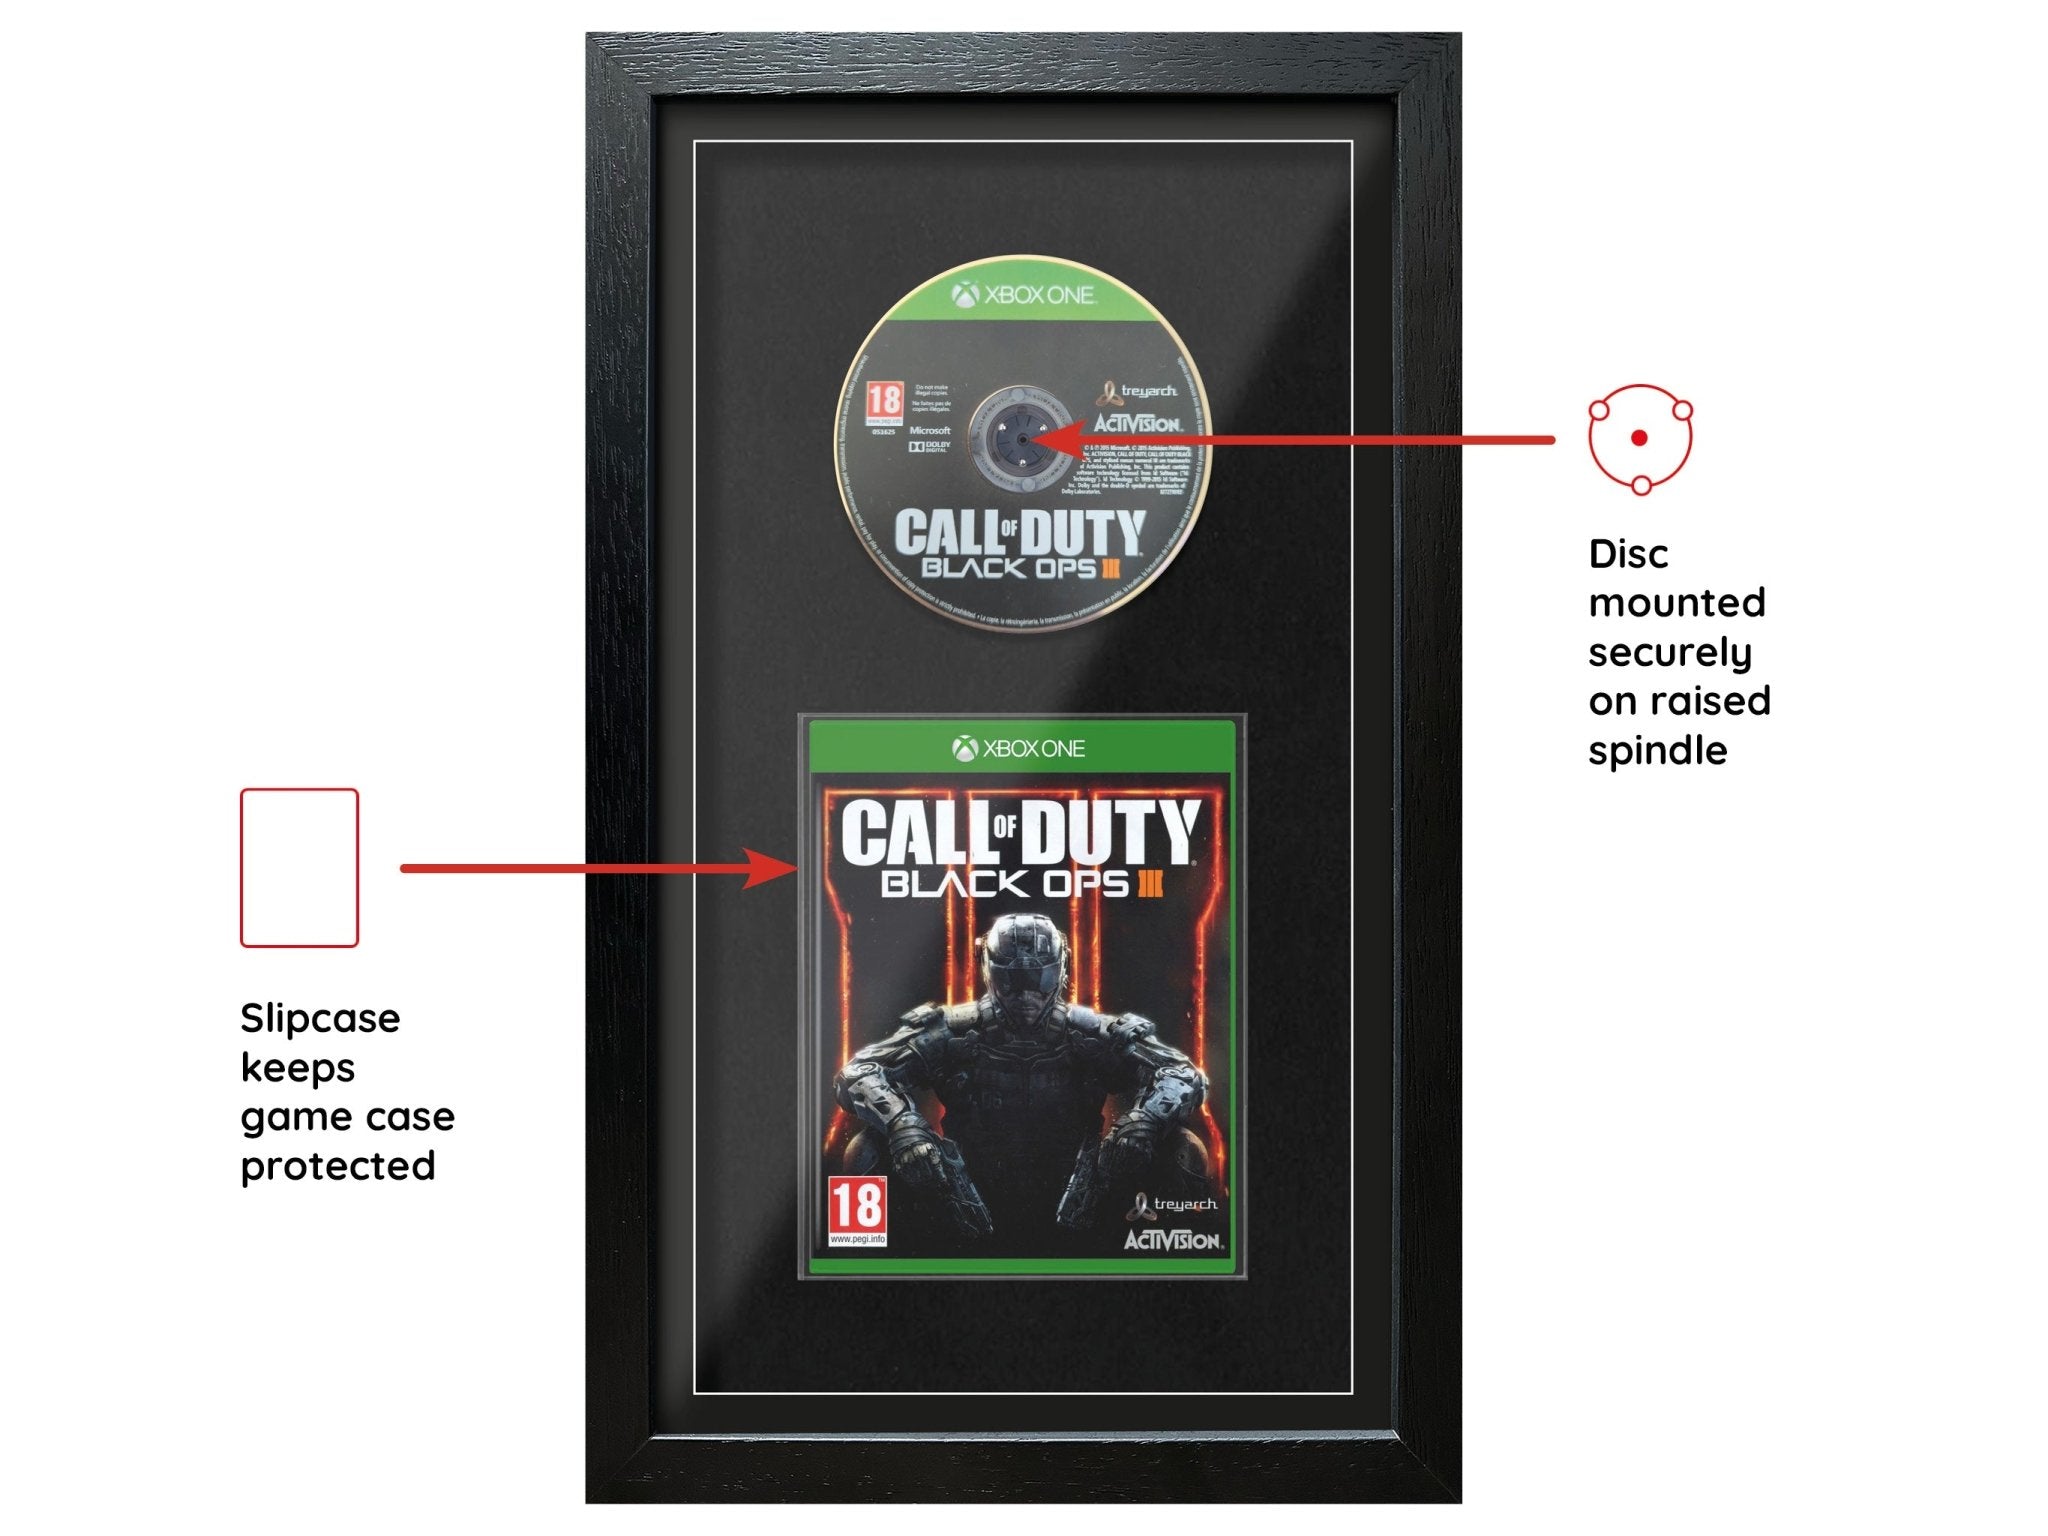 Call of Duty: Black Ops III (Xbox One) Exhibition Range Framed Game - Frame-A-Game